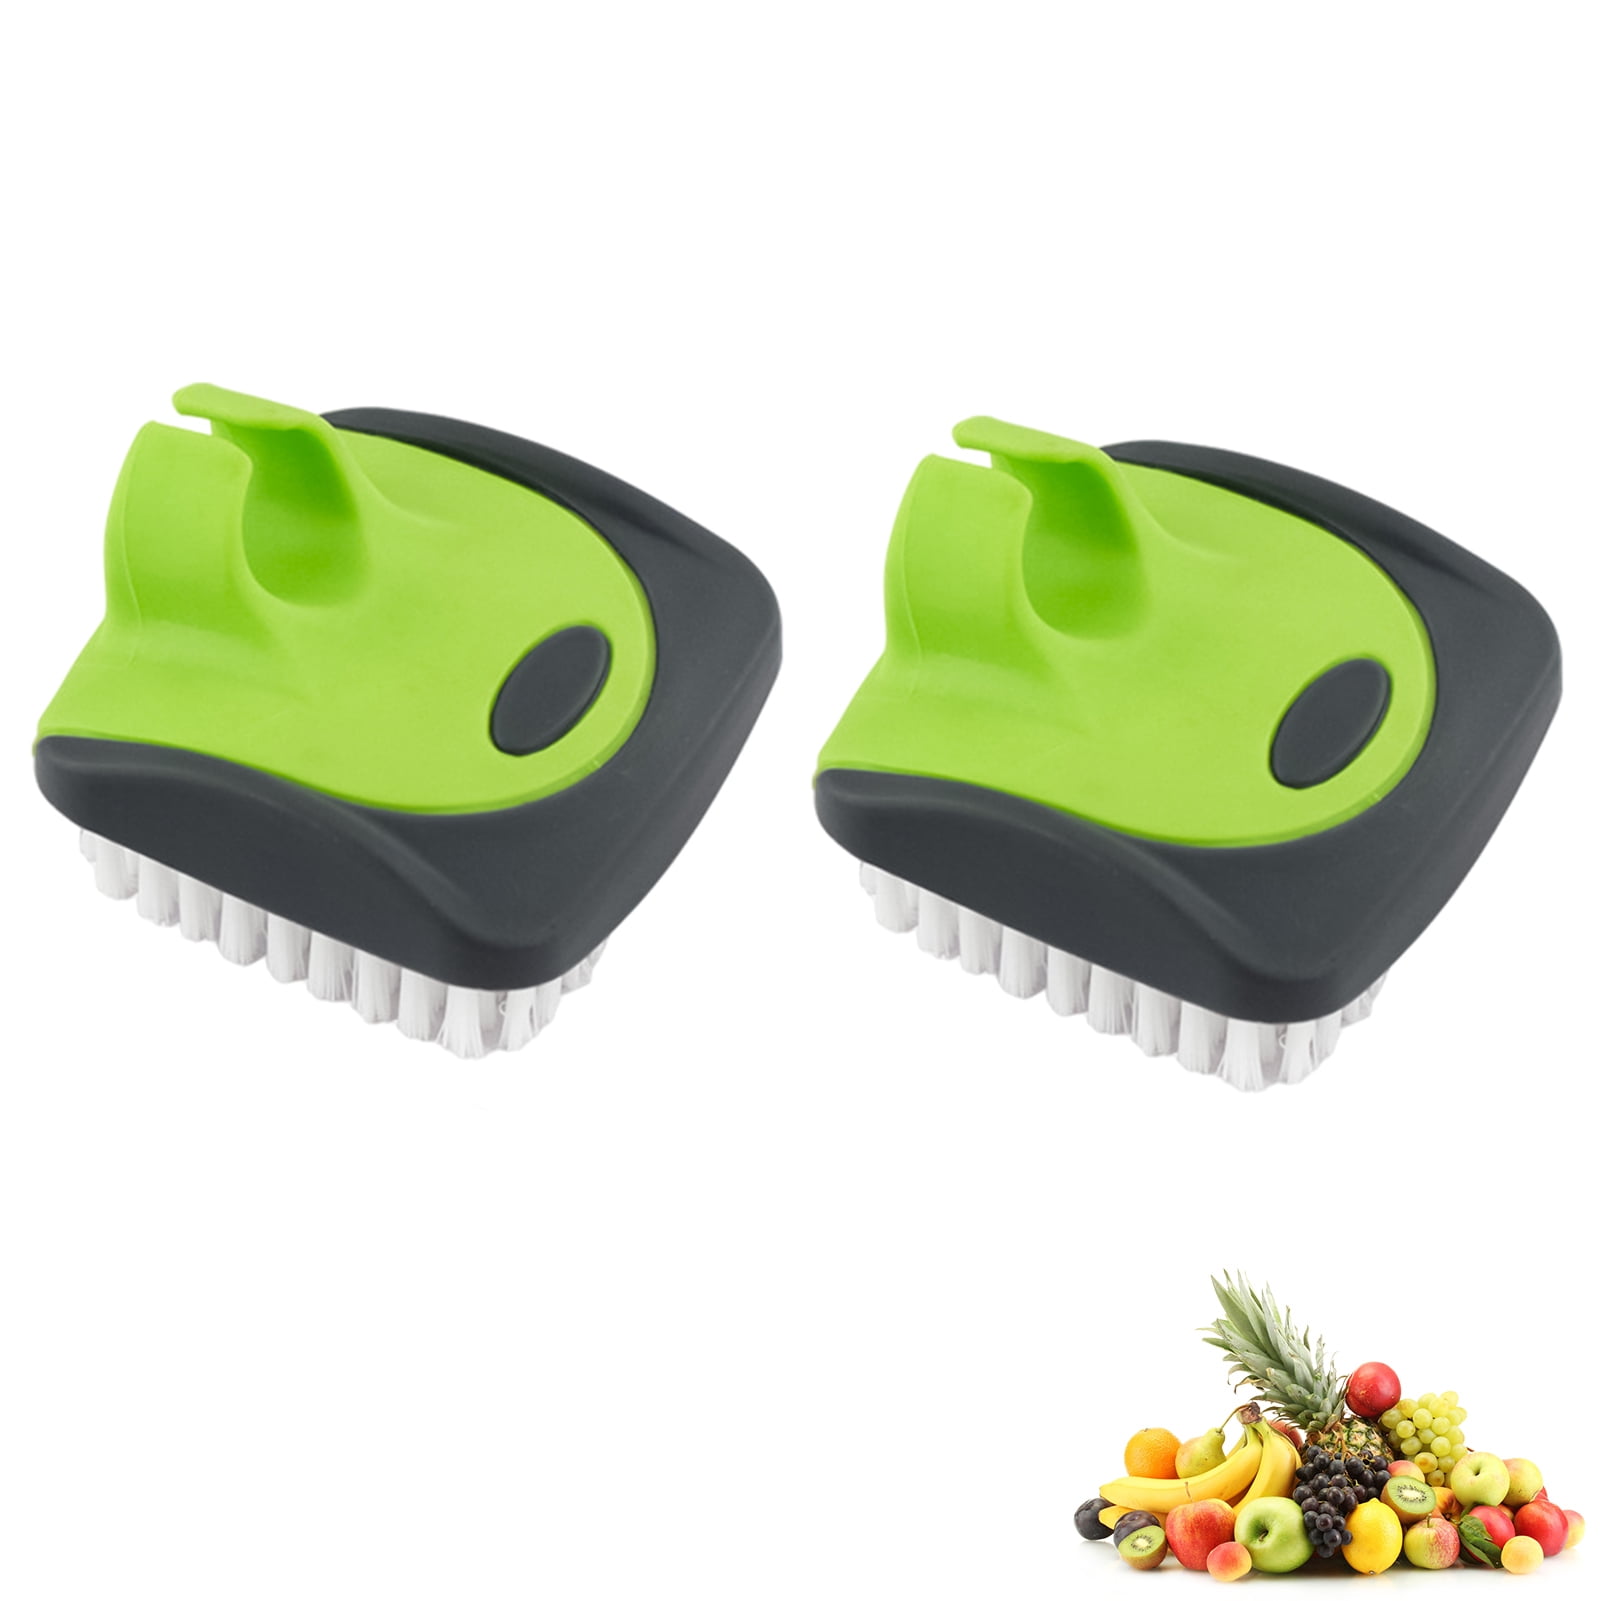 1X Flexible Vegetable Brush Fruit and Vegetable Cleaning Brushes Scrubber  U4N1